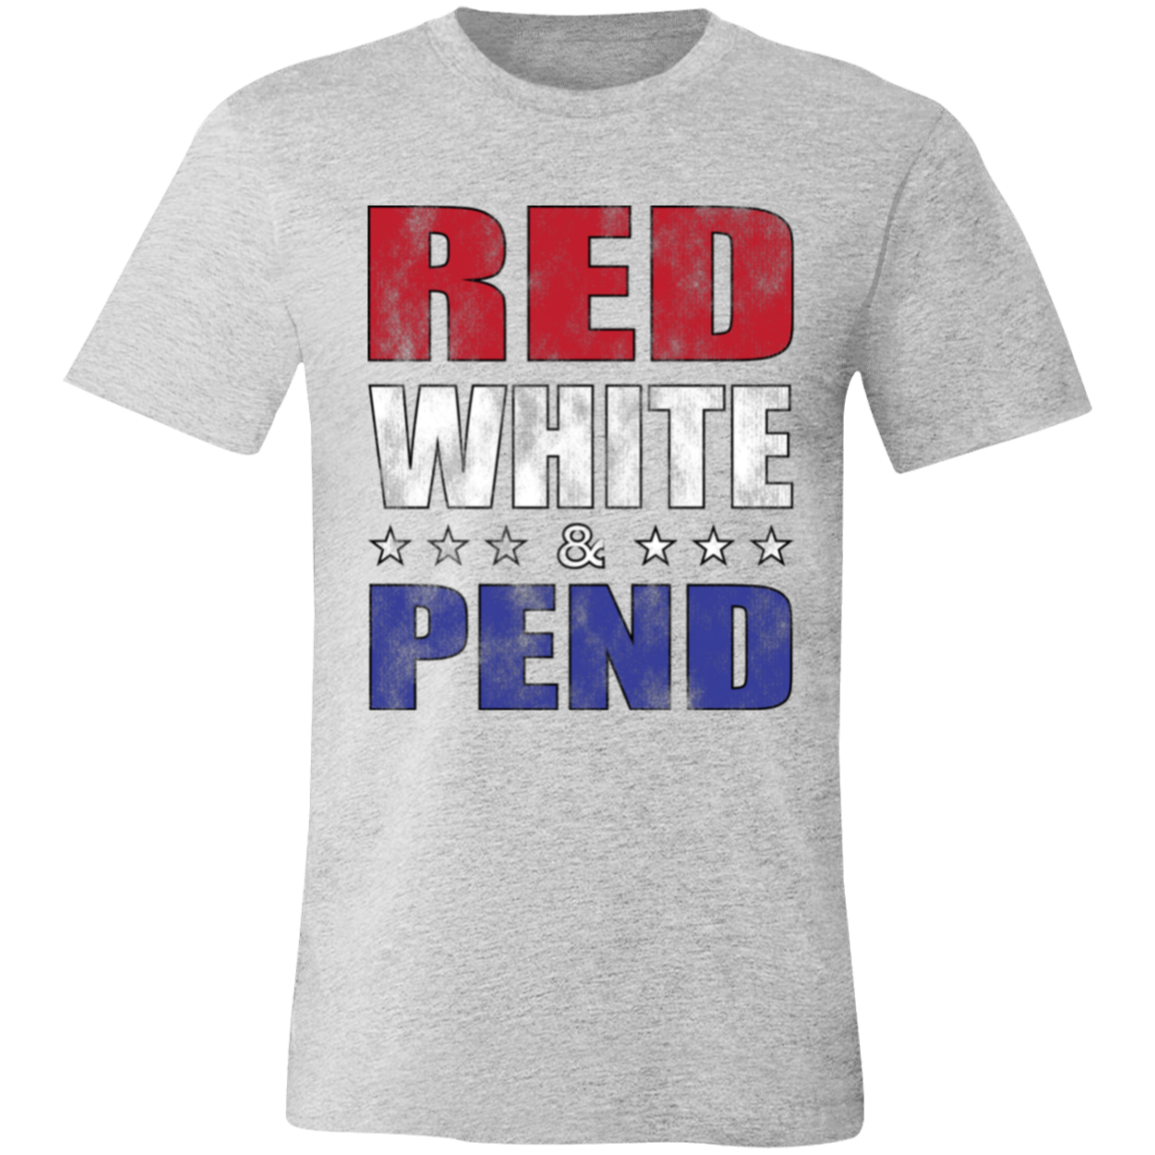 Red White & Pend Shirt